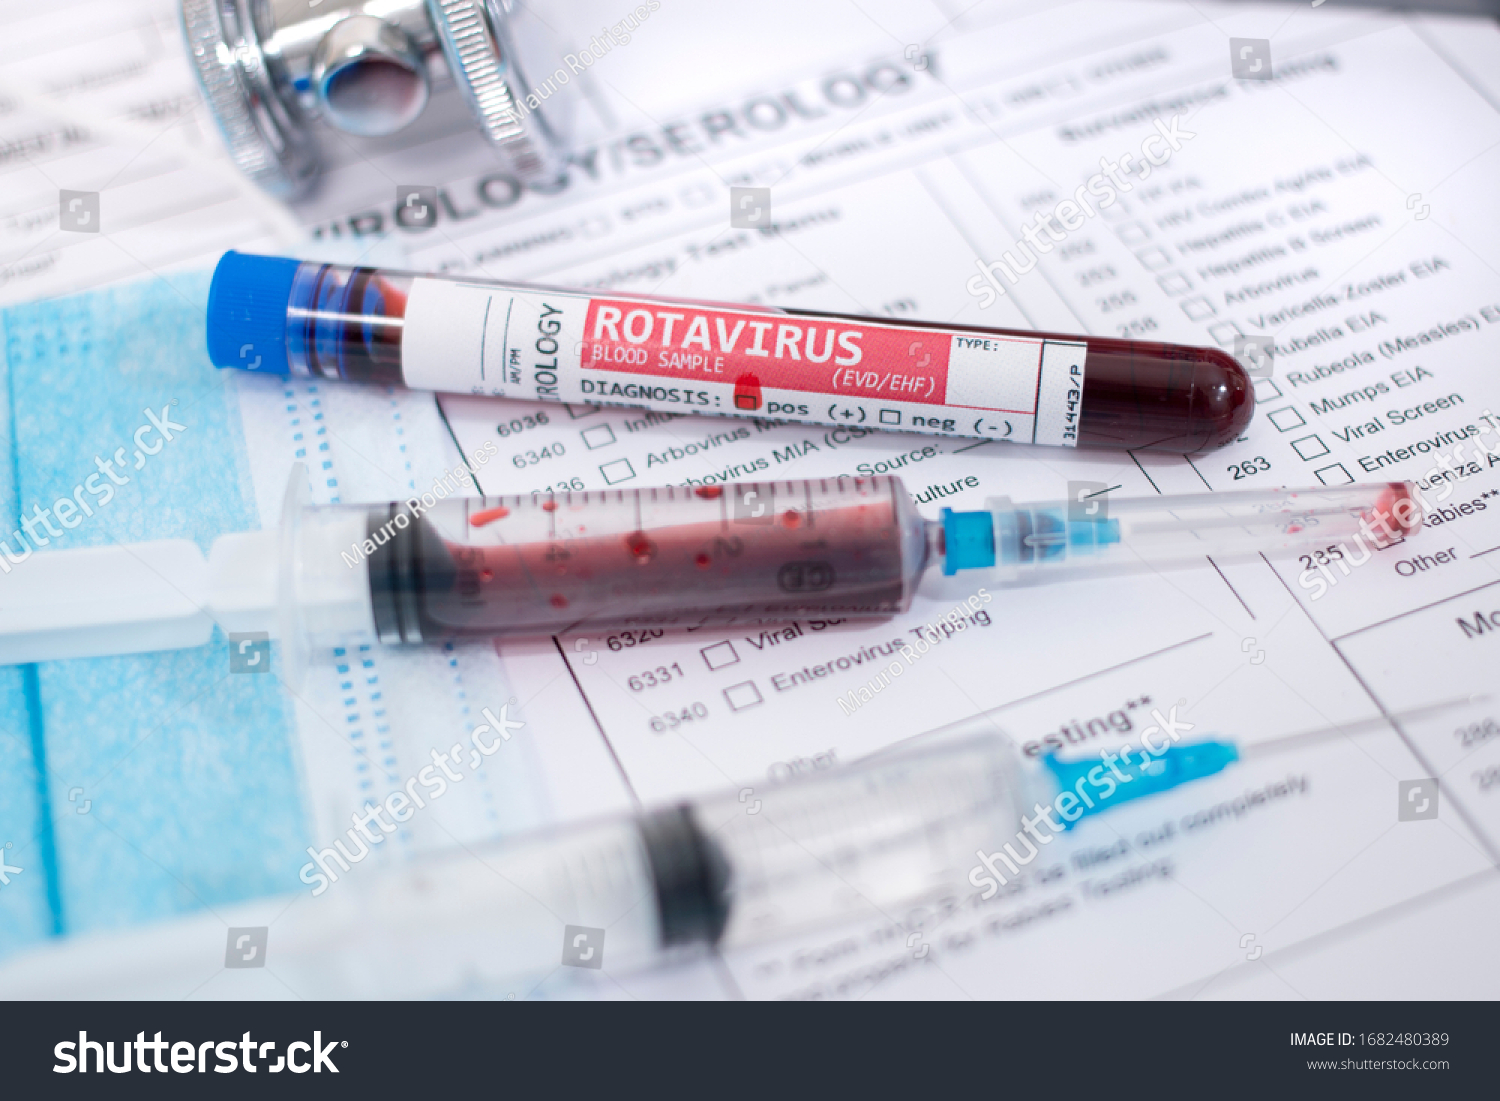 Fictional Blood samples with infected Rotavirus, with mask, syringe and lab report. #1682480389